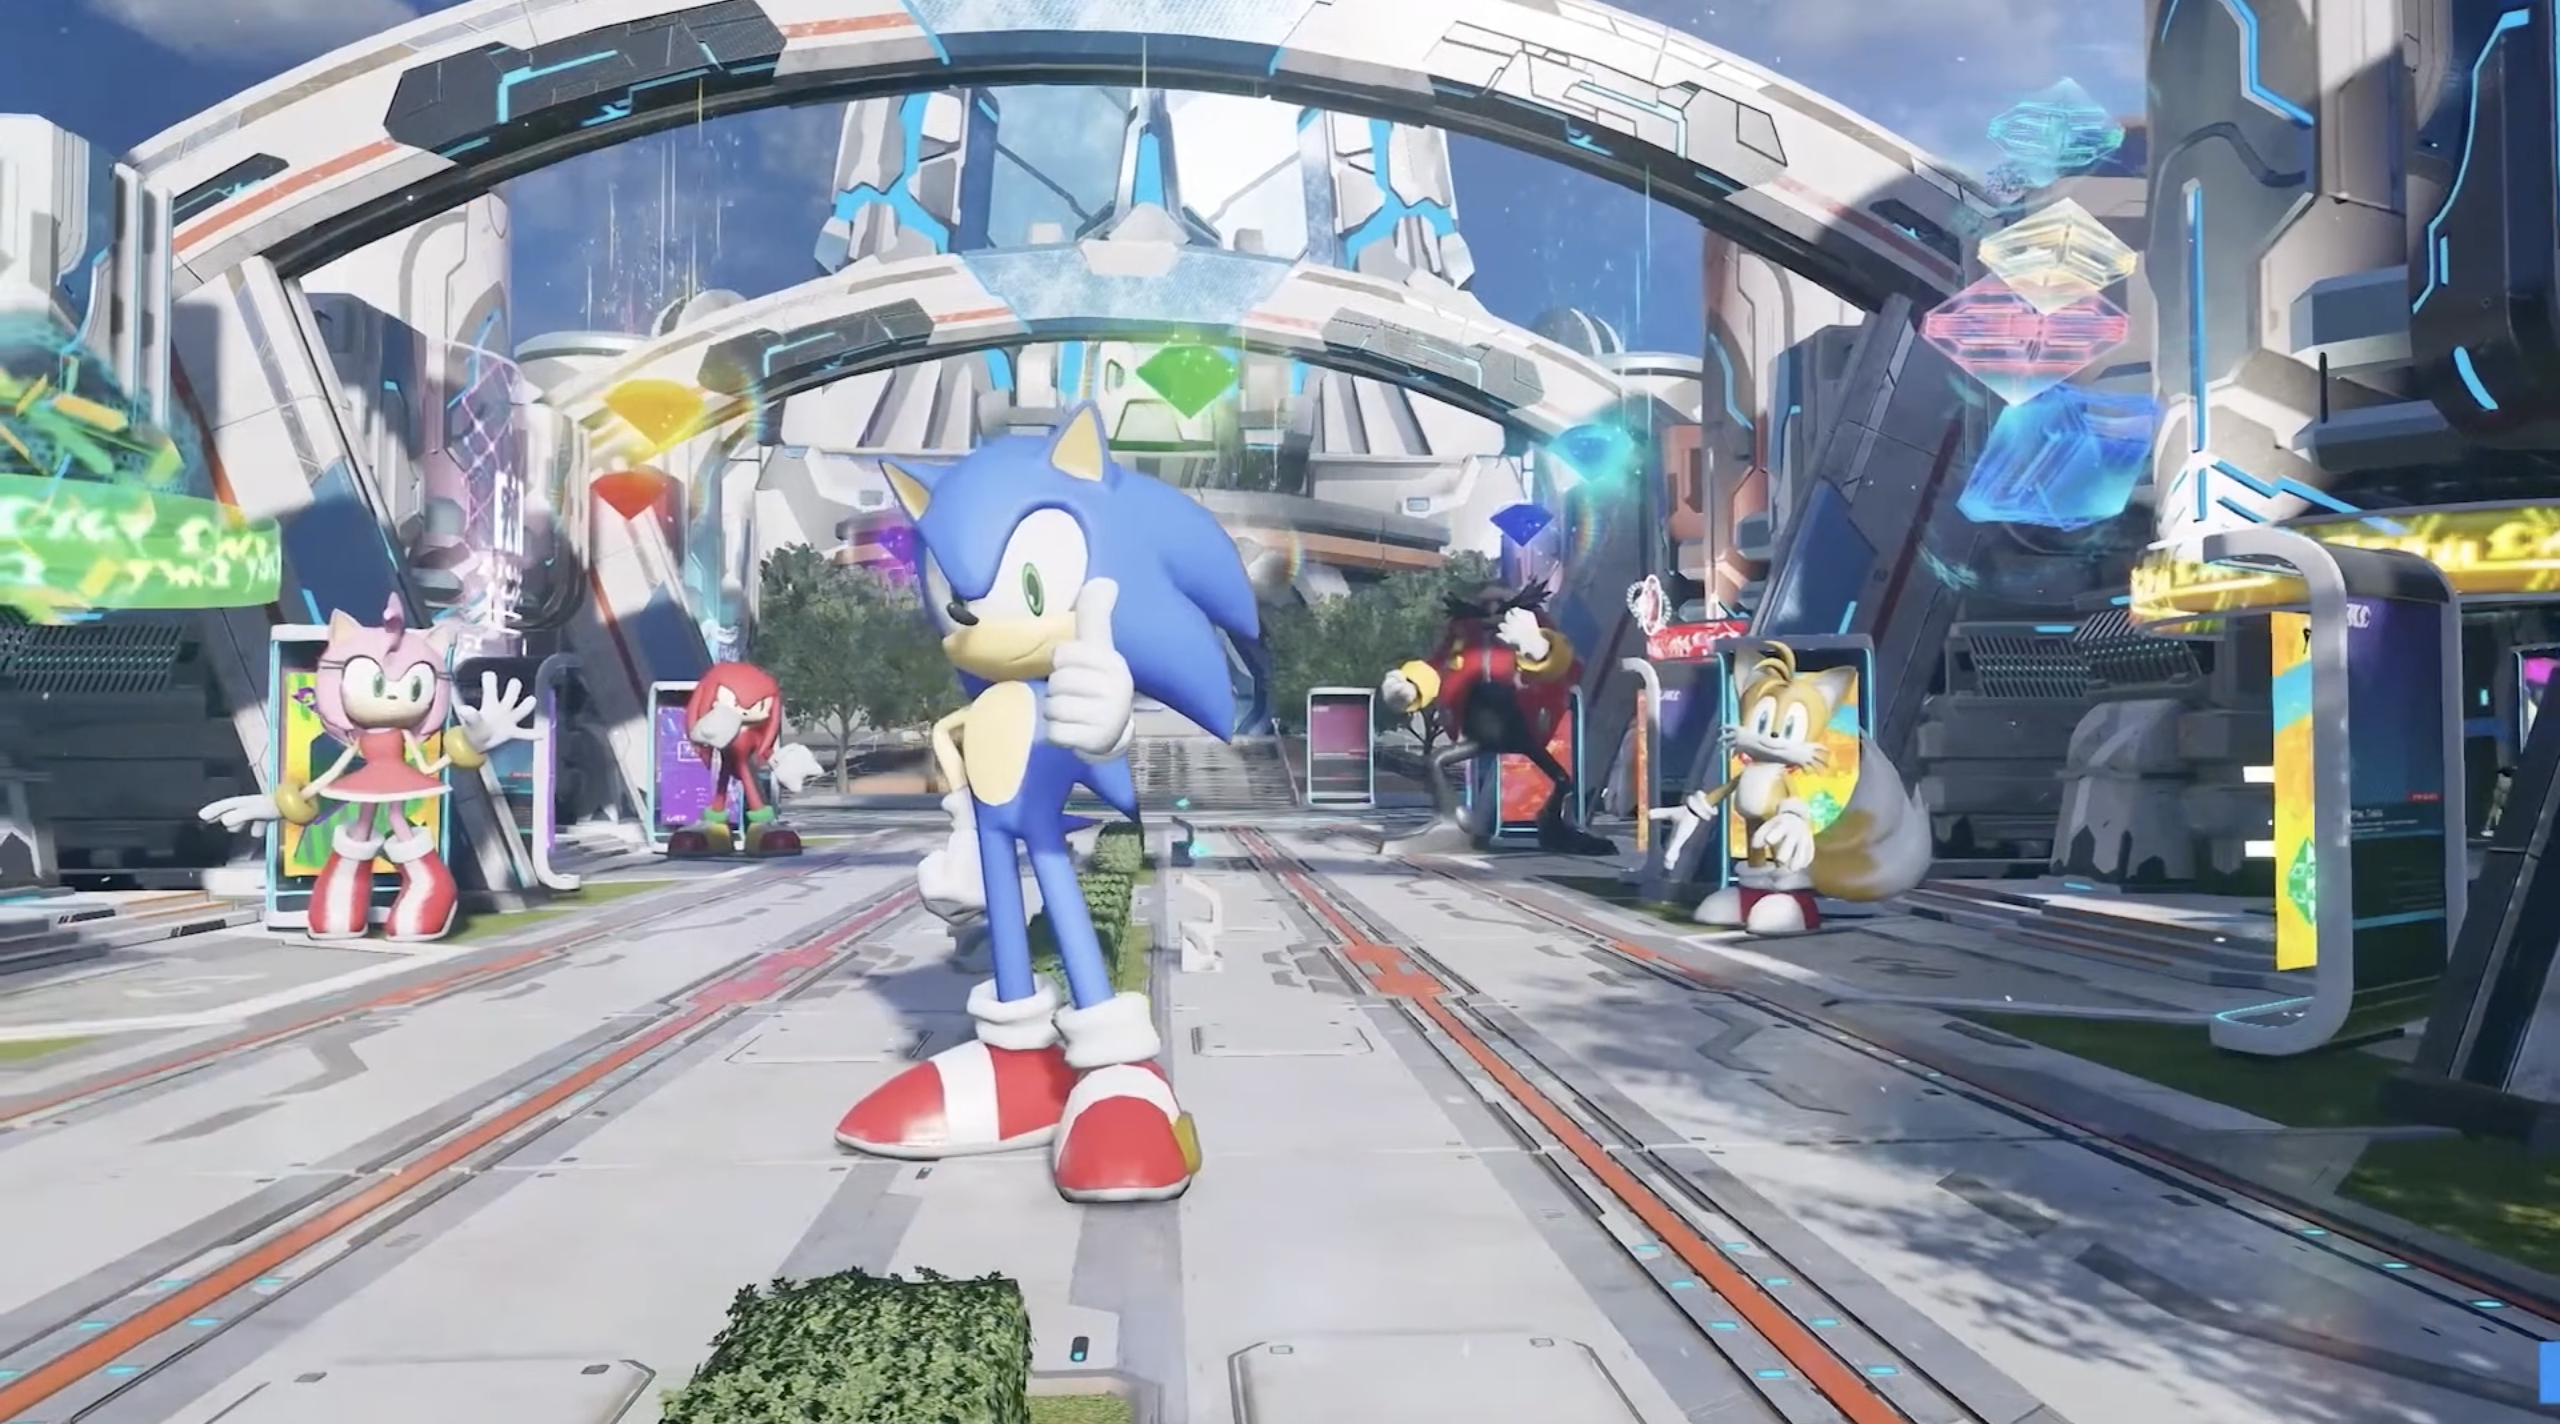 Ghost in the Shell, Sonic the Hedgehog Coming to PSO2 New Genesis